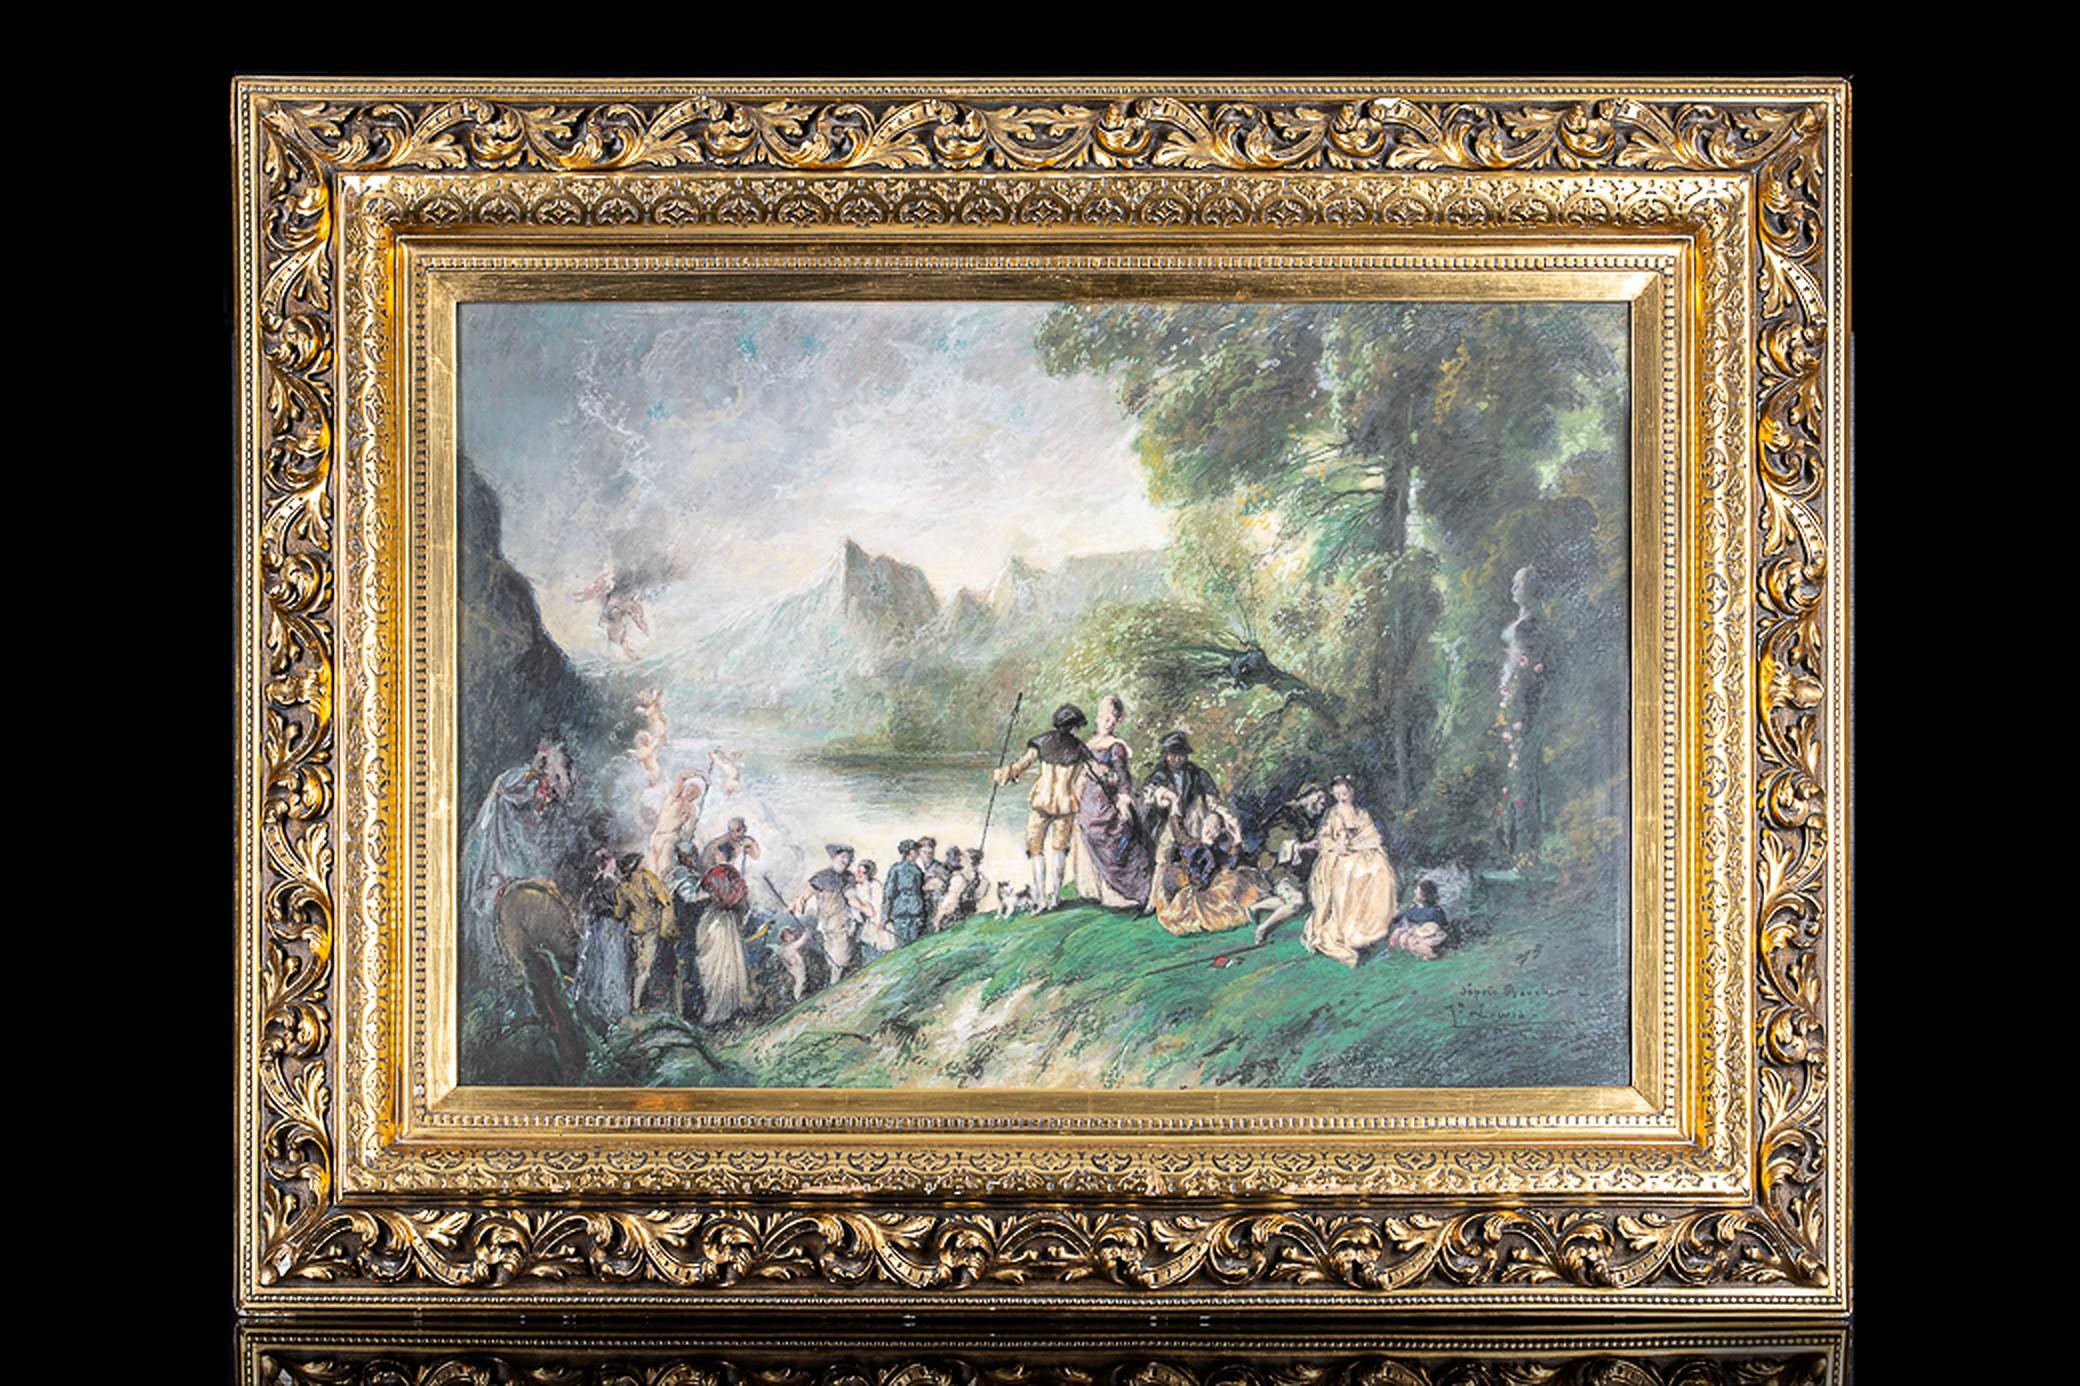 After Jean Antoine Watteau (Valenciennes, 1684-Nogent-sur-Marne, 1721), Disembarkation for the Island of Cythera, Pastel drawing, Framed, 19th or 20th century.